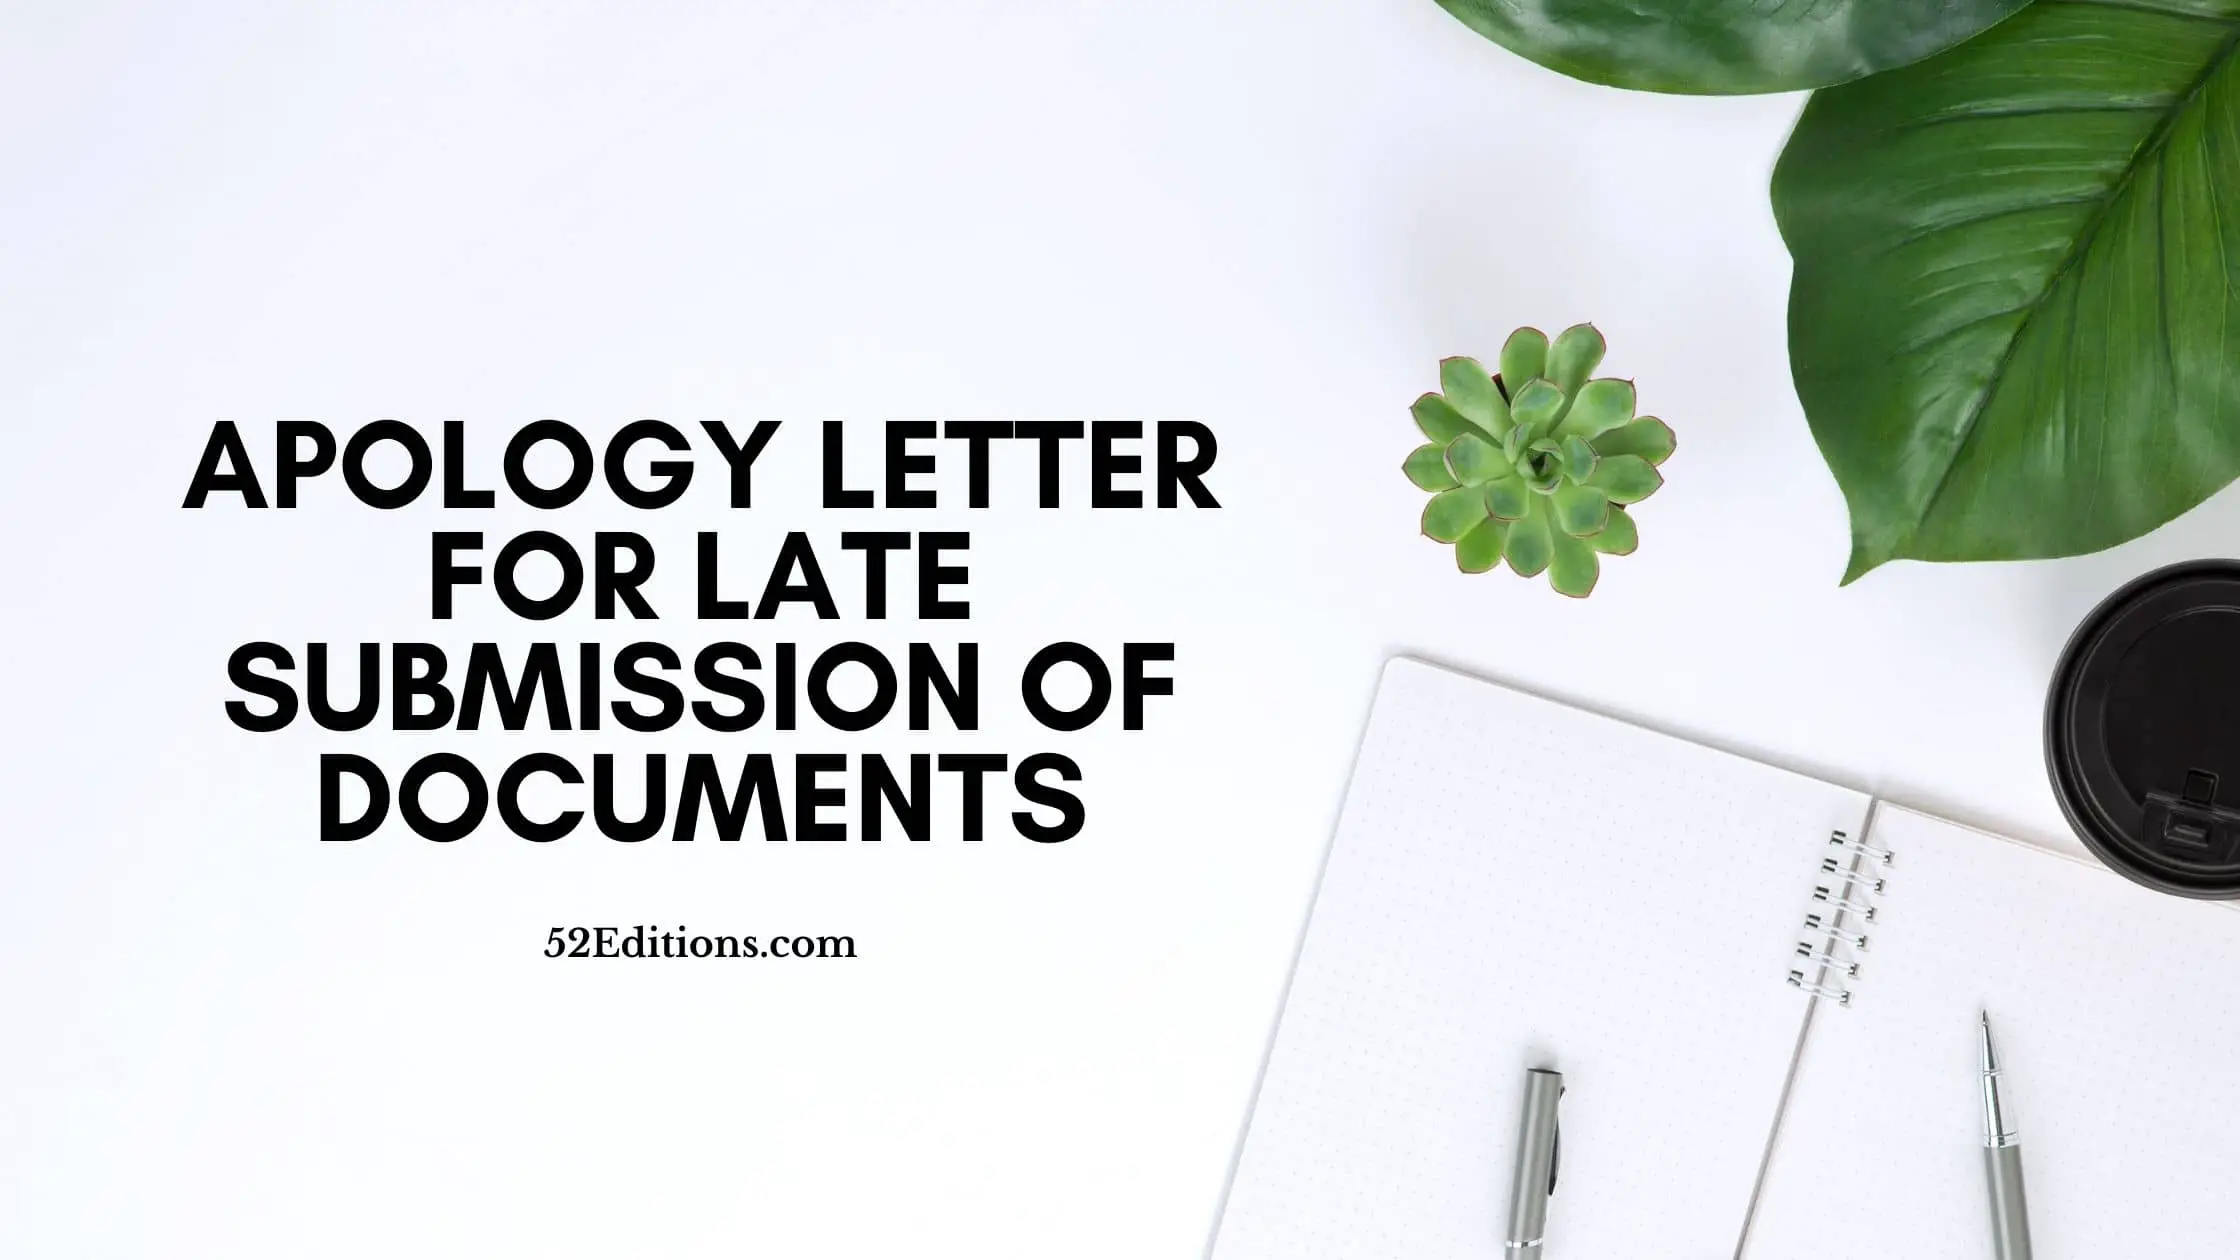 How to write letter for apologizing for late submission documents Sample Apology Letter For Late Submission Of Documents Free Letter Templates